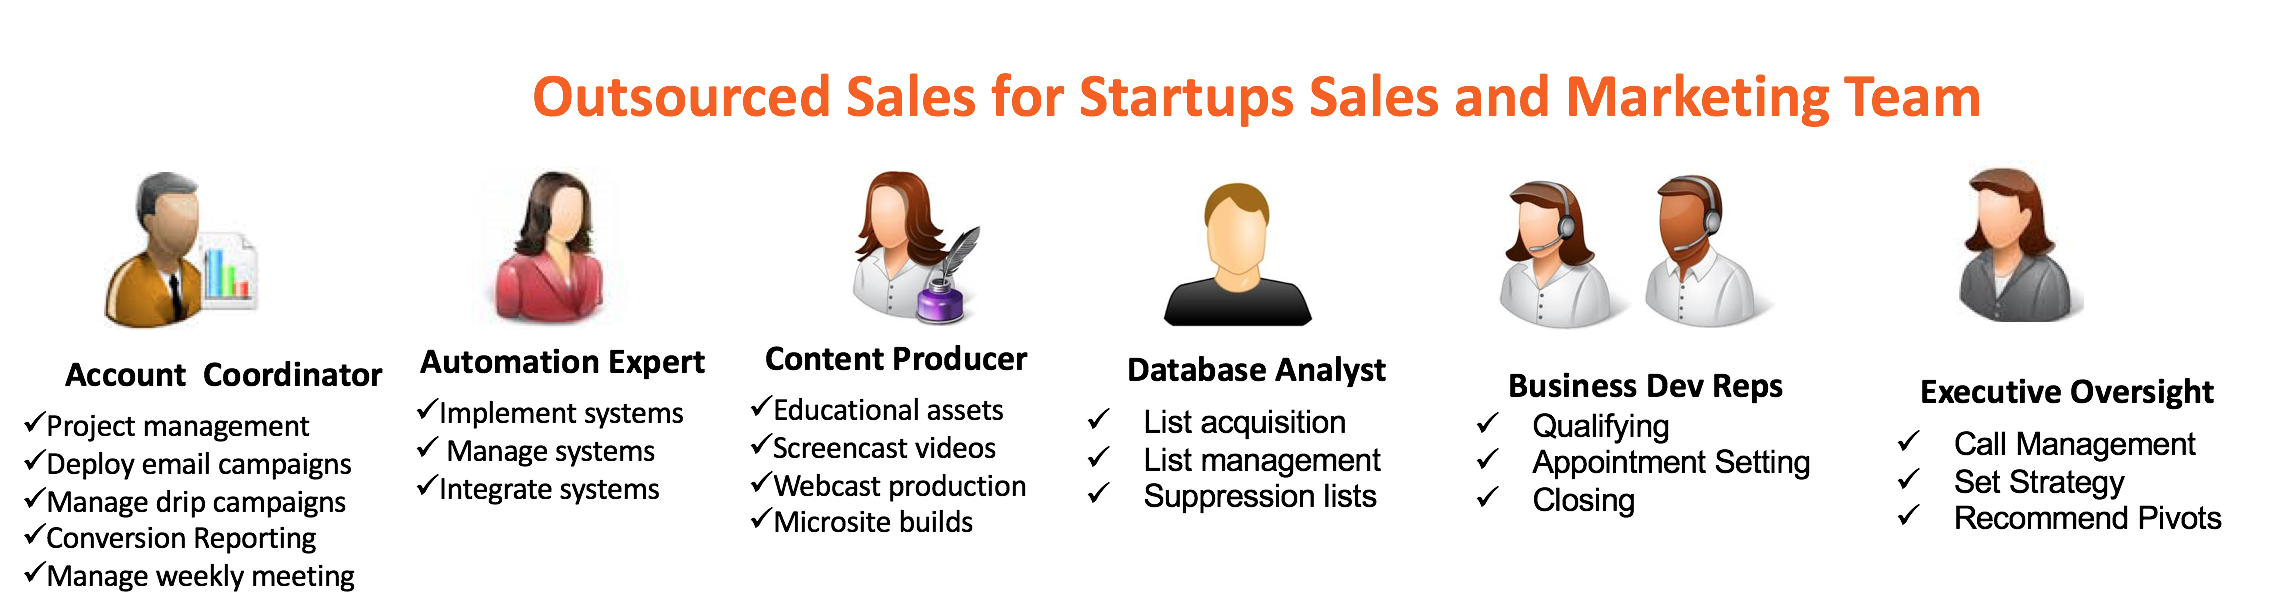 Outsourced Sales for Startups Sales and Marketing Team